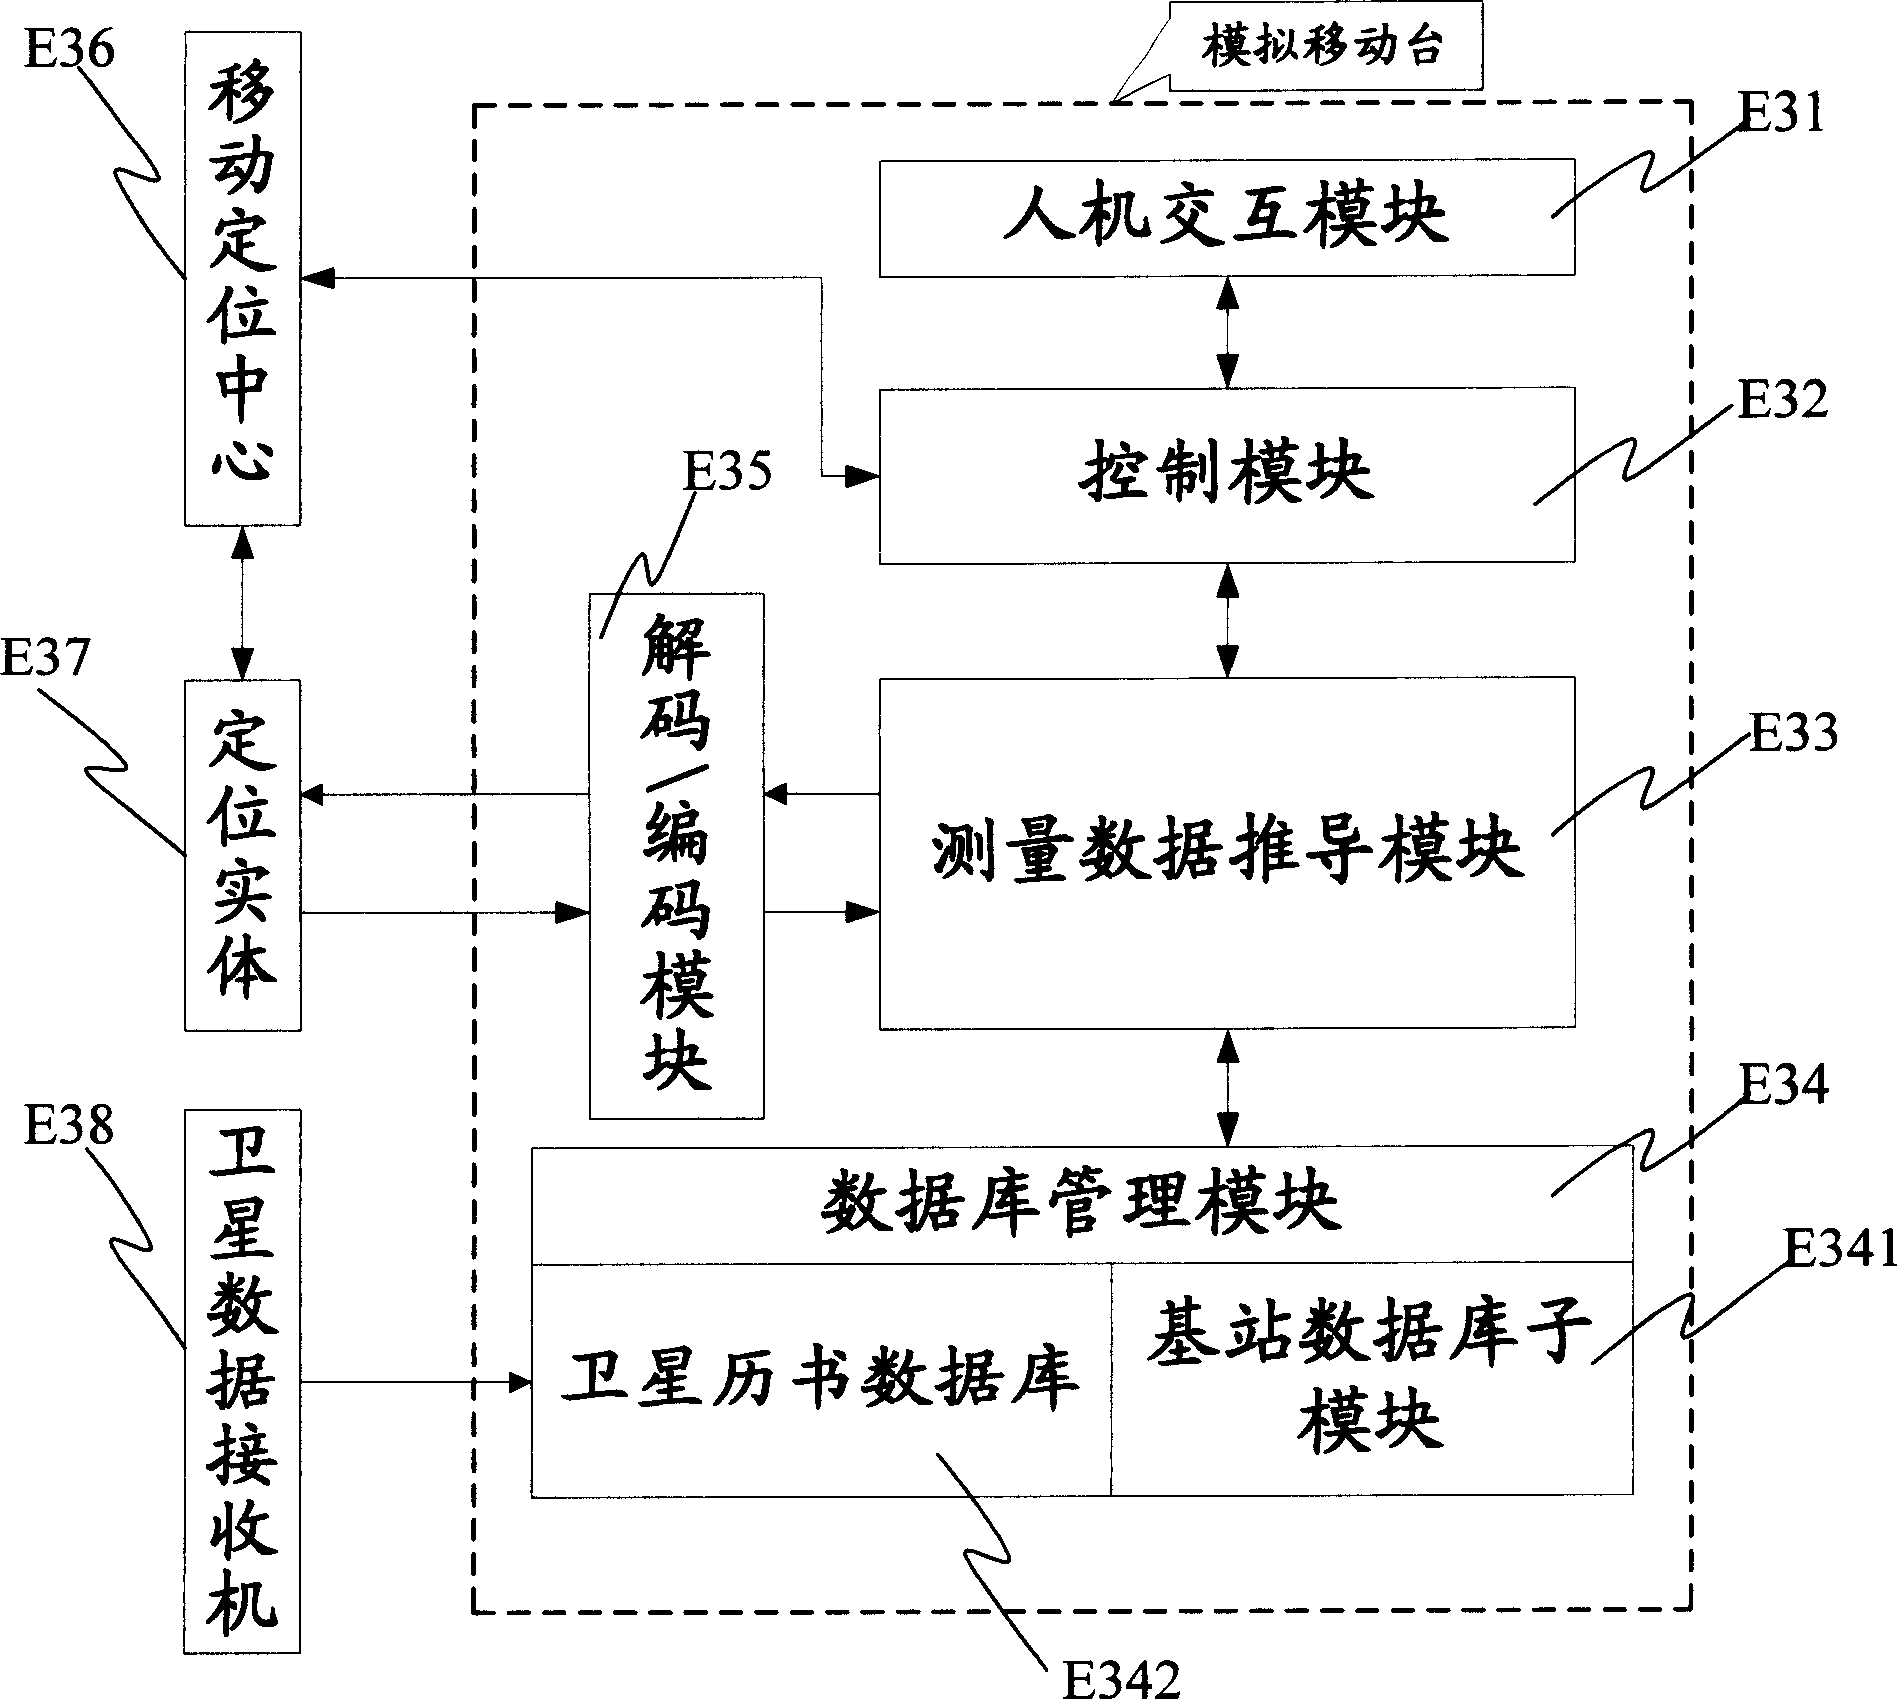 Analogue mobile station system, analogue mobile station positioning testing system and testing method